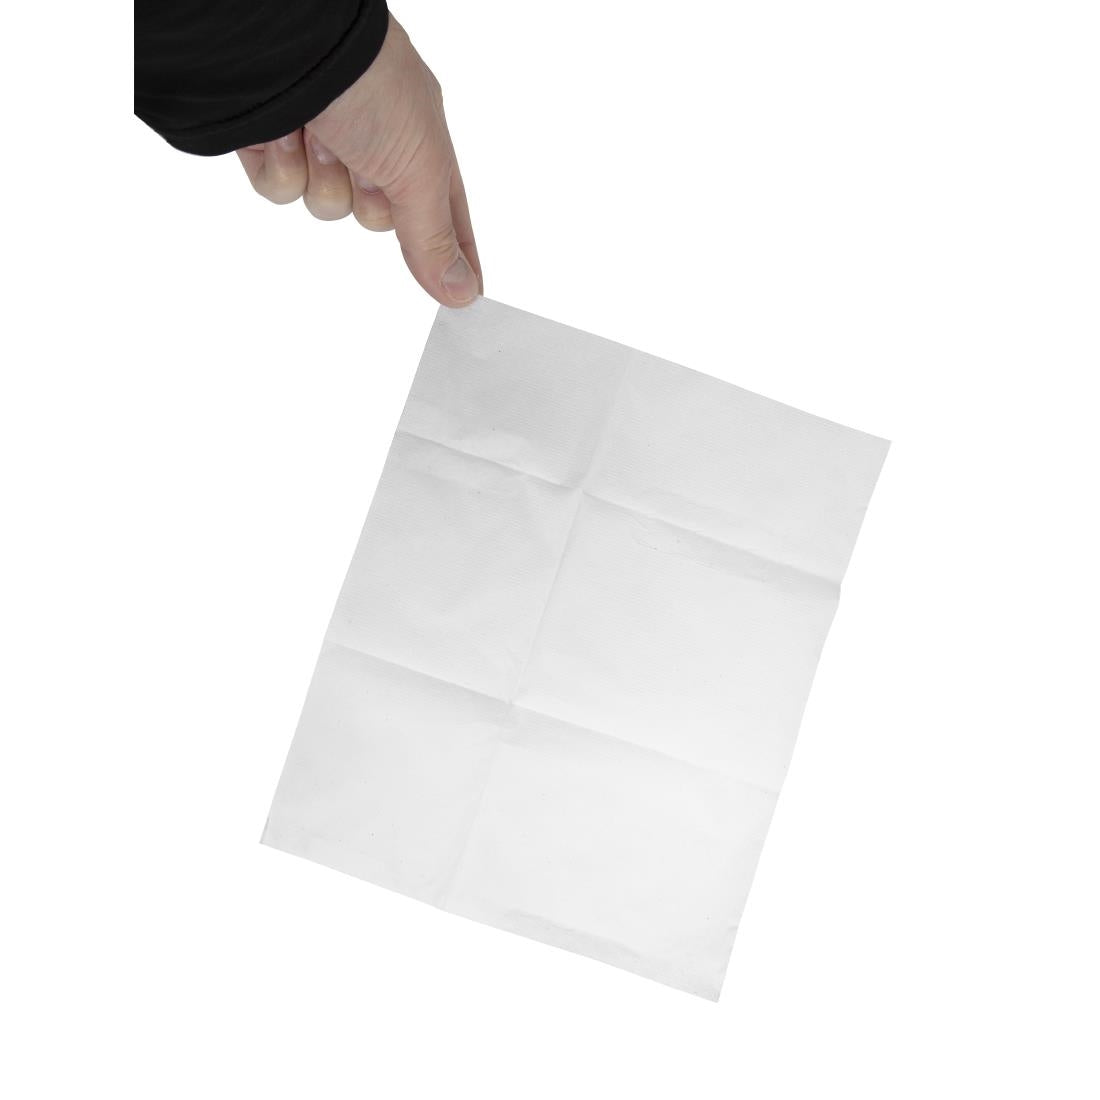 White Lunch Napkin White 120 x 90mm (Pack of 6000)